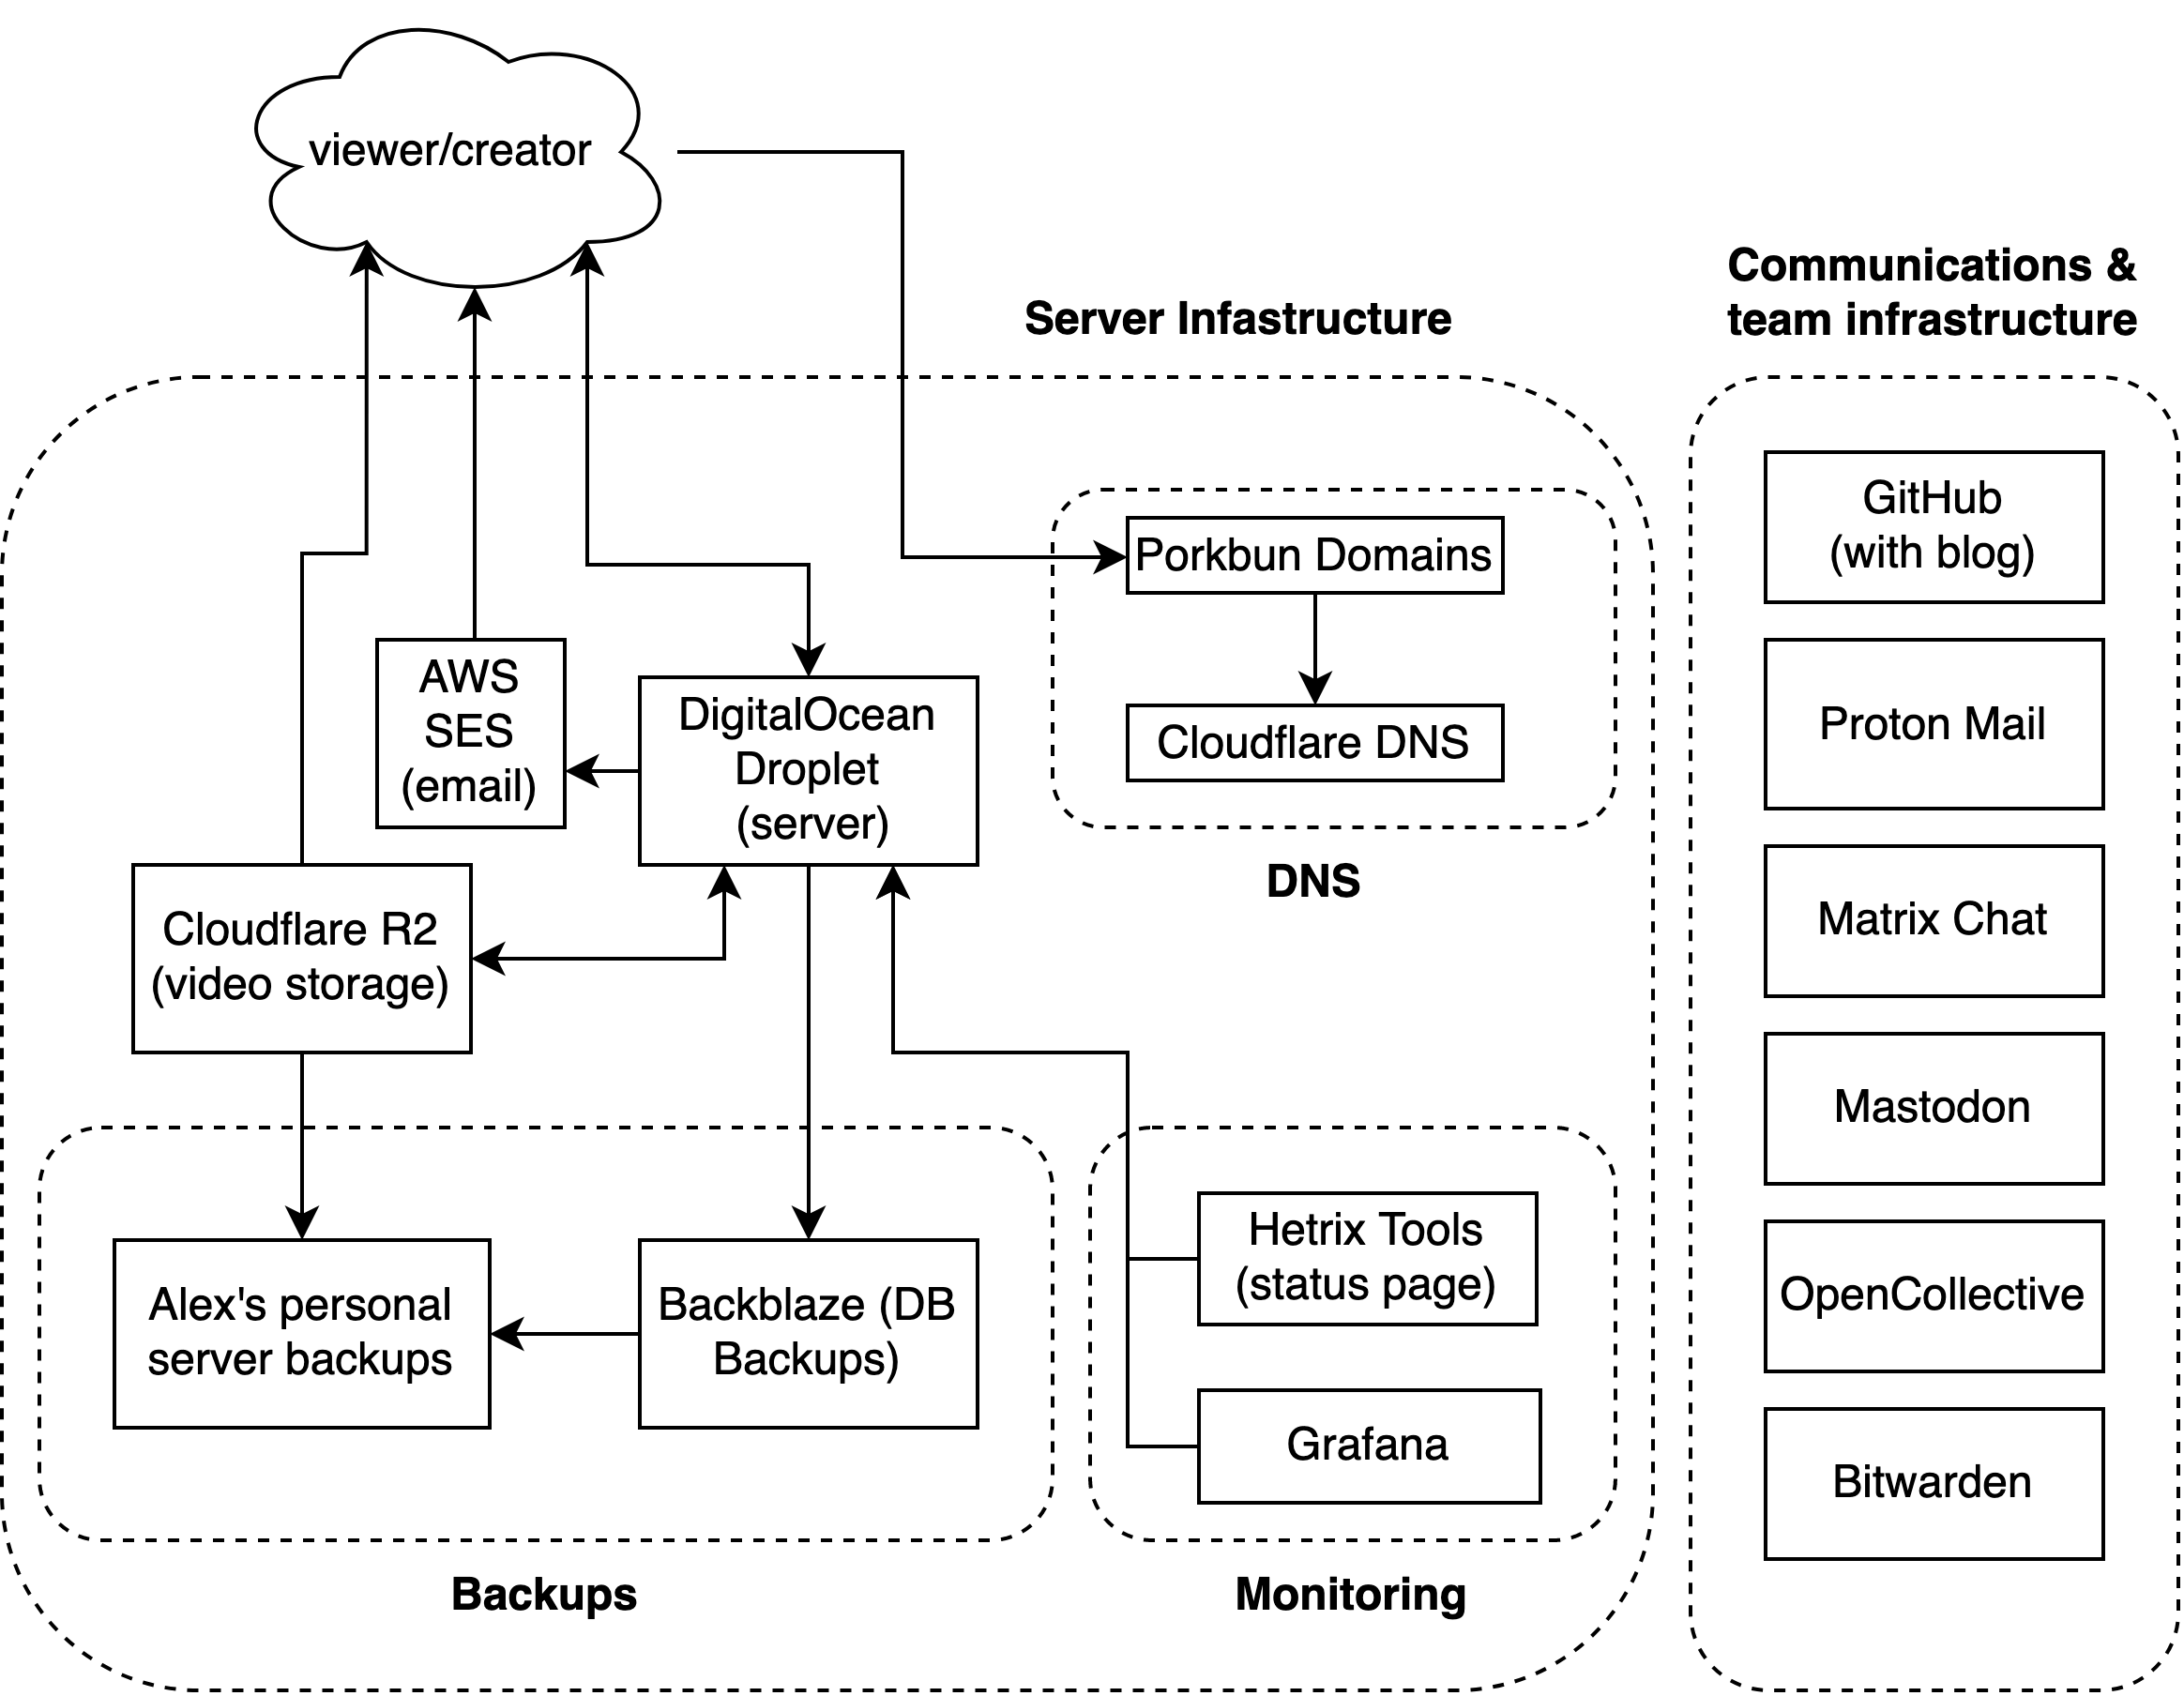 Diagram of services and how they relate